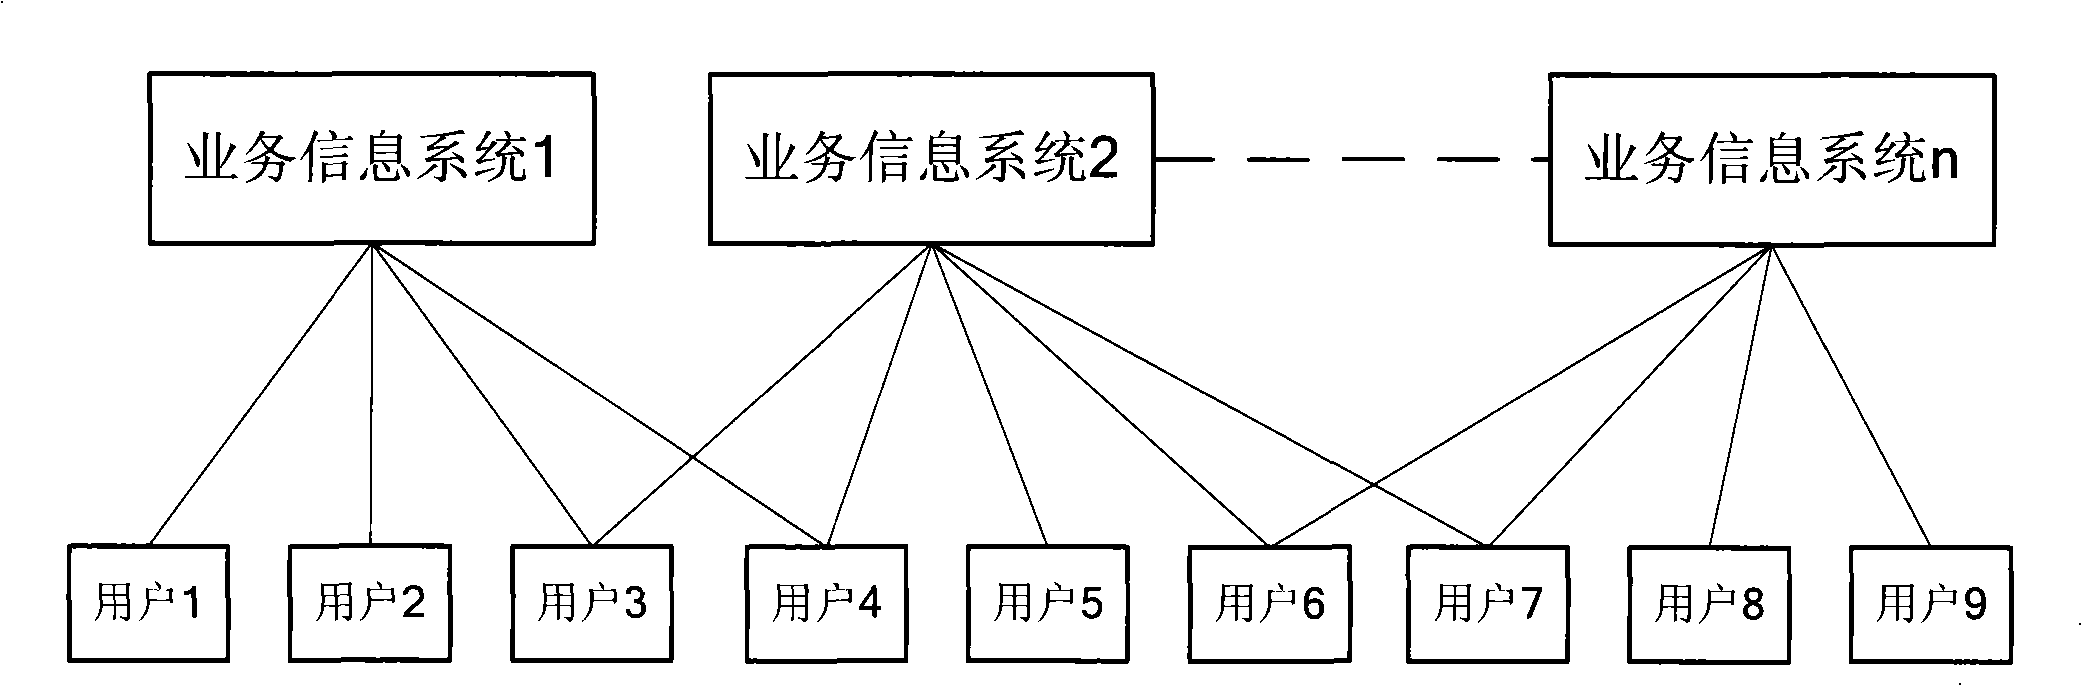 System and method for providing network service relating to four parties